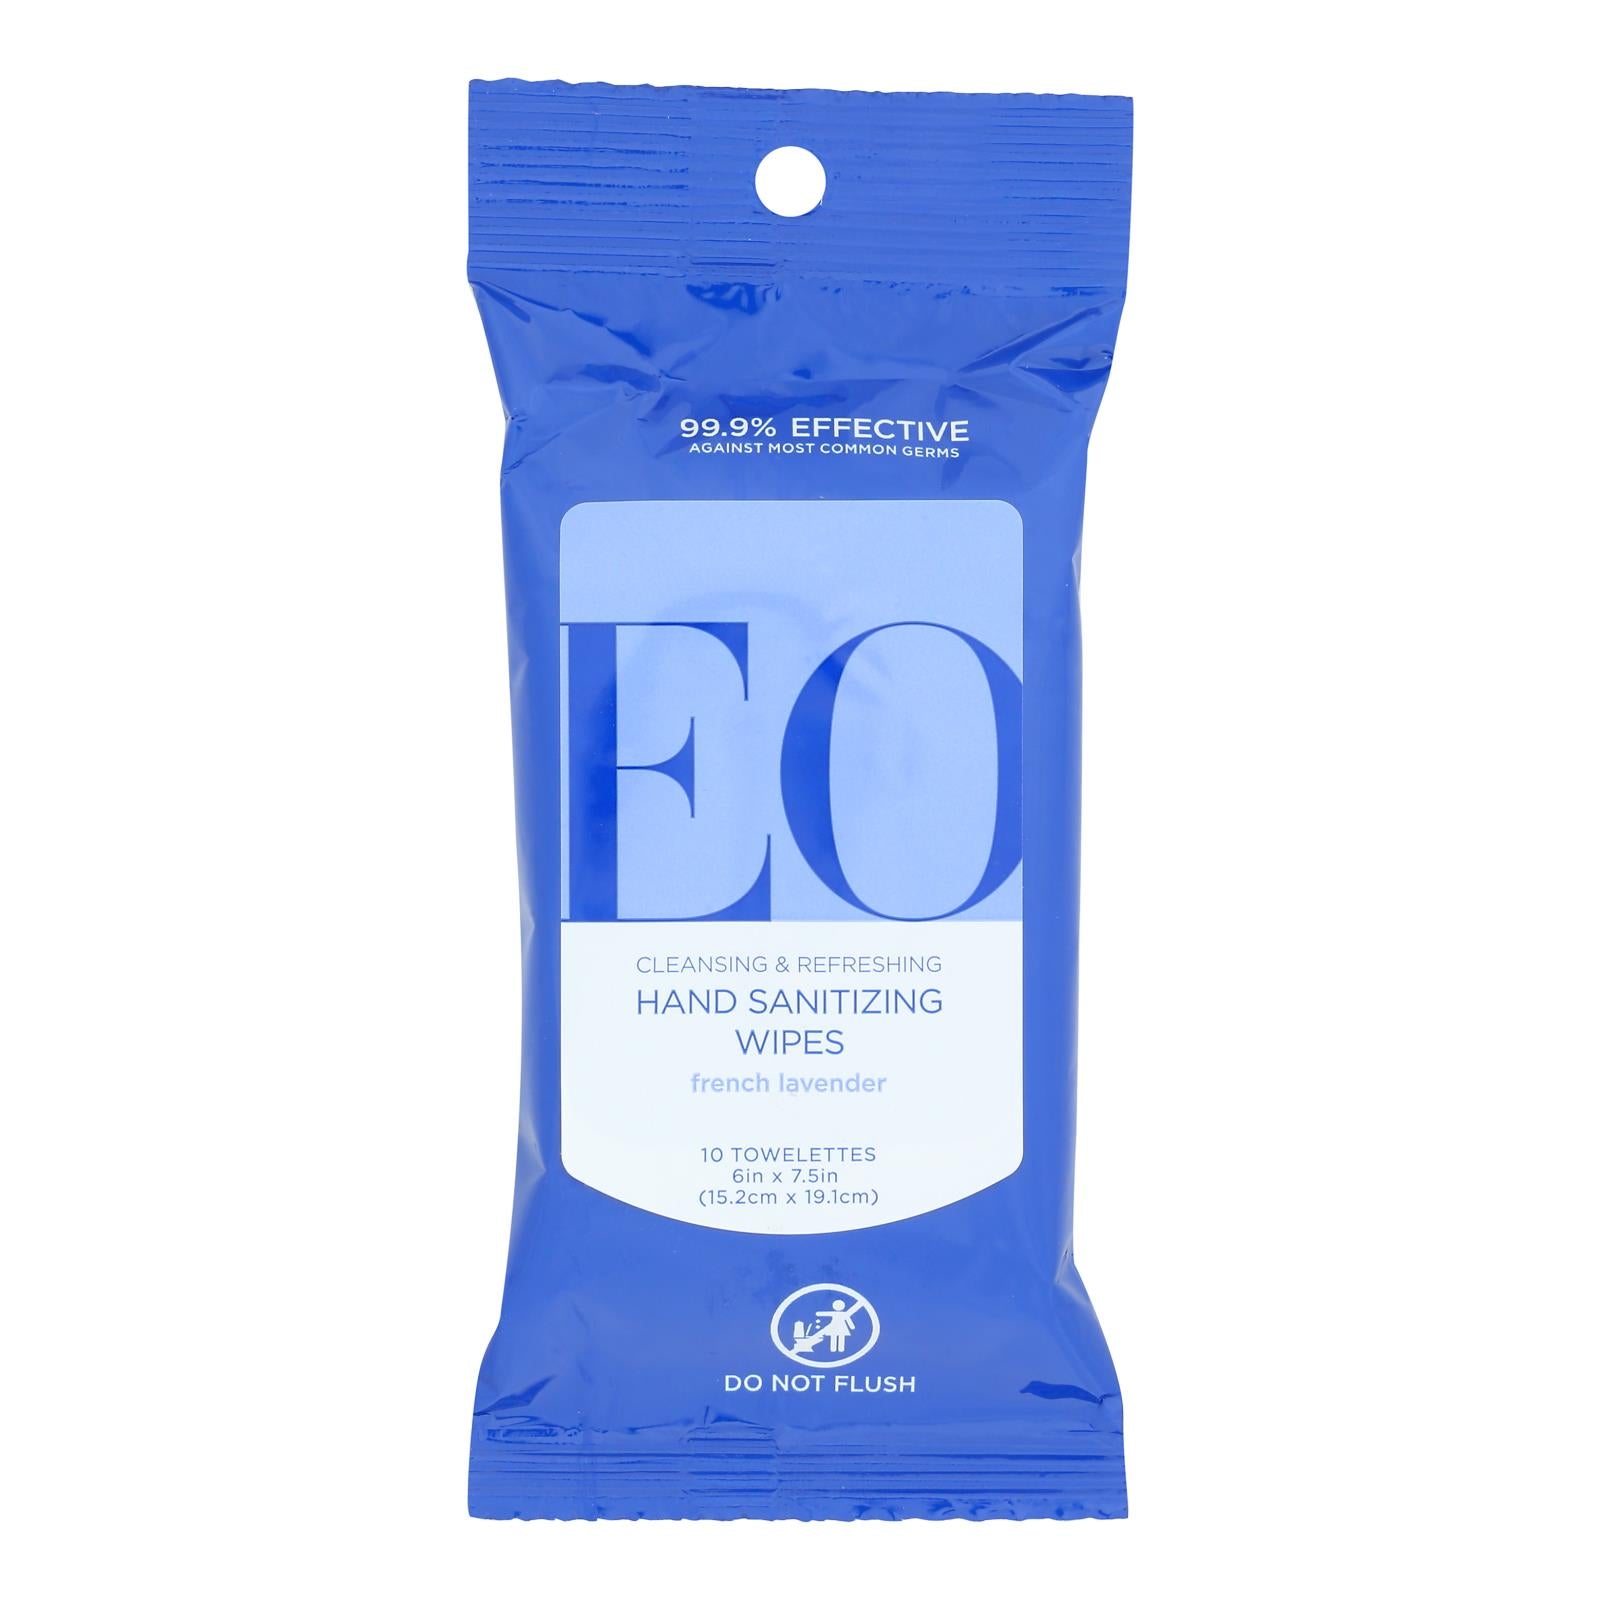 Eo Products - Hand Sanitizer Wipes Display Center - Lavender - Case Of 6 - 10 Pack